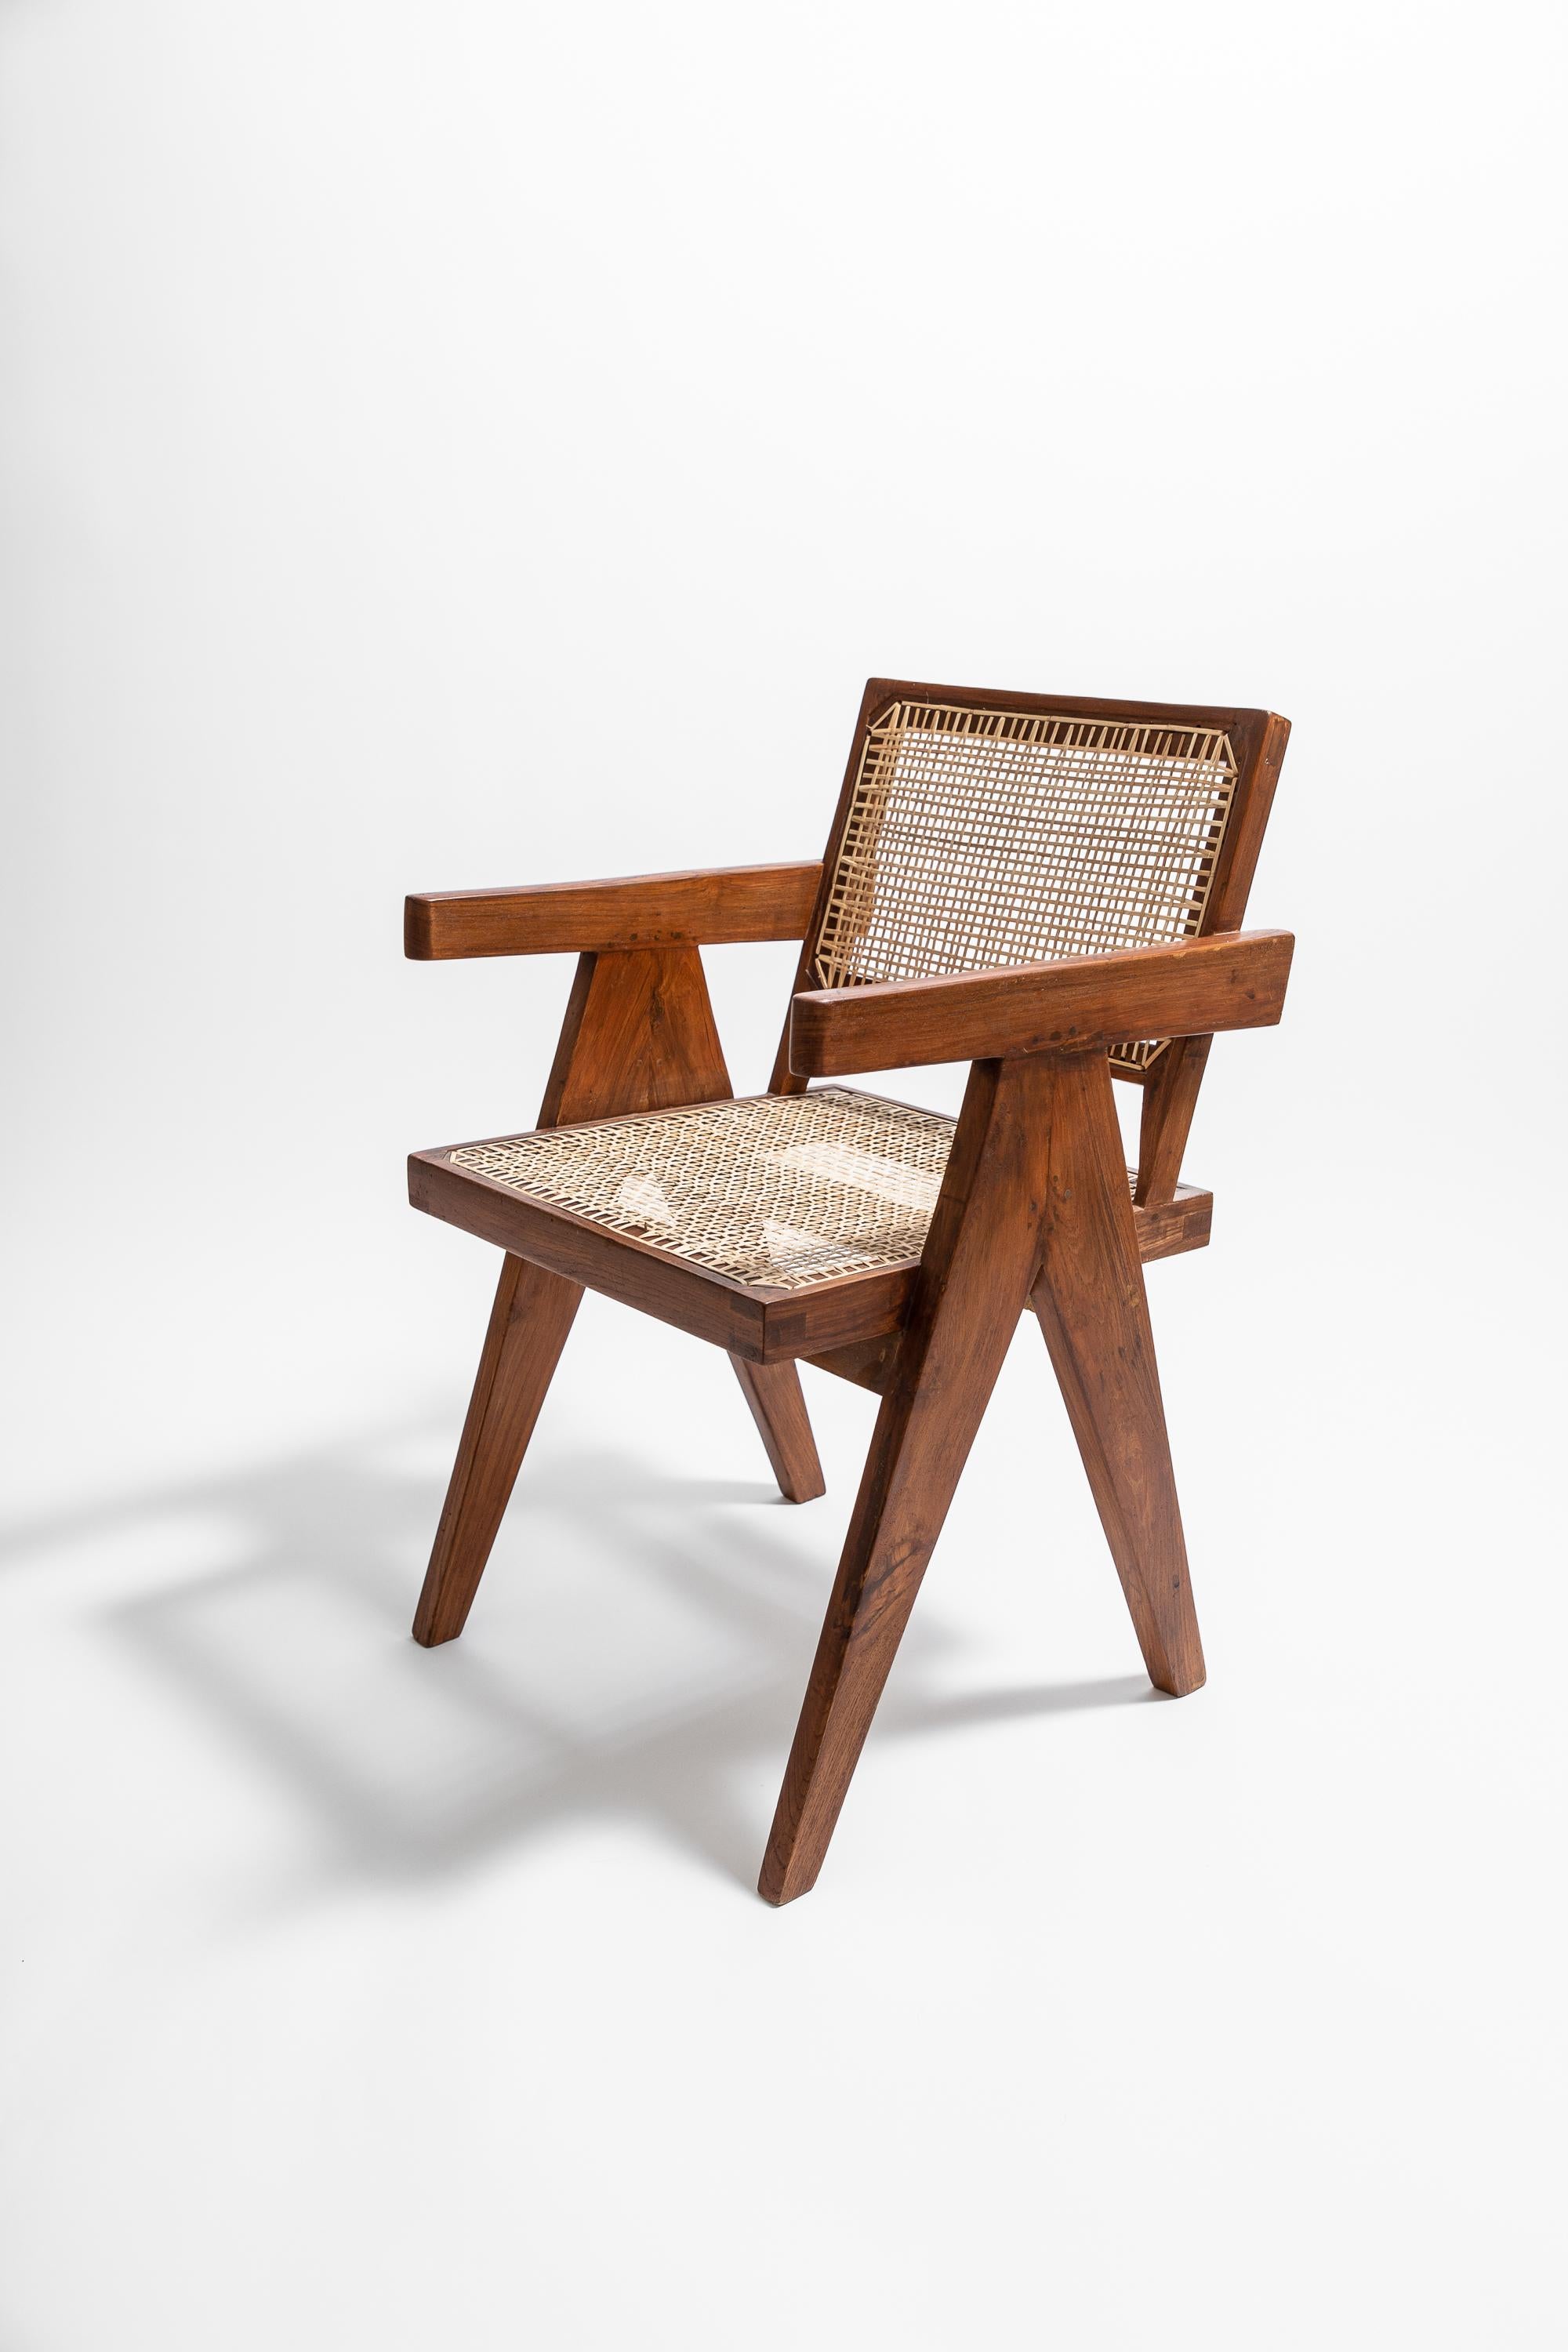 Authentic 'Office Chair' from the administrative buildings of Chandigarh (Ref. PJ-SI-28-B).

In excellent condition - joints have been restored and cane work replaced. 

Pierre Jeanneret (22 March 1896 - 4 December 1967) was a Swiss architect